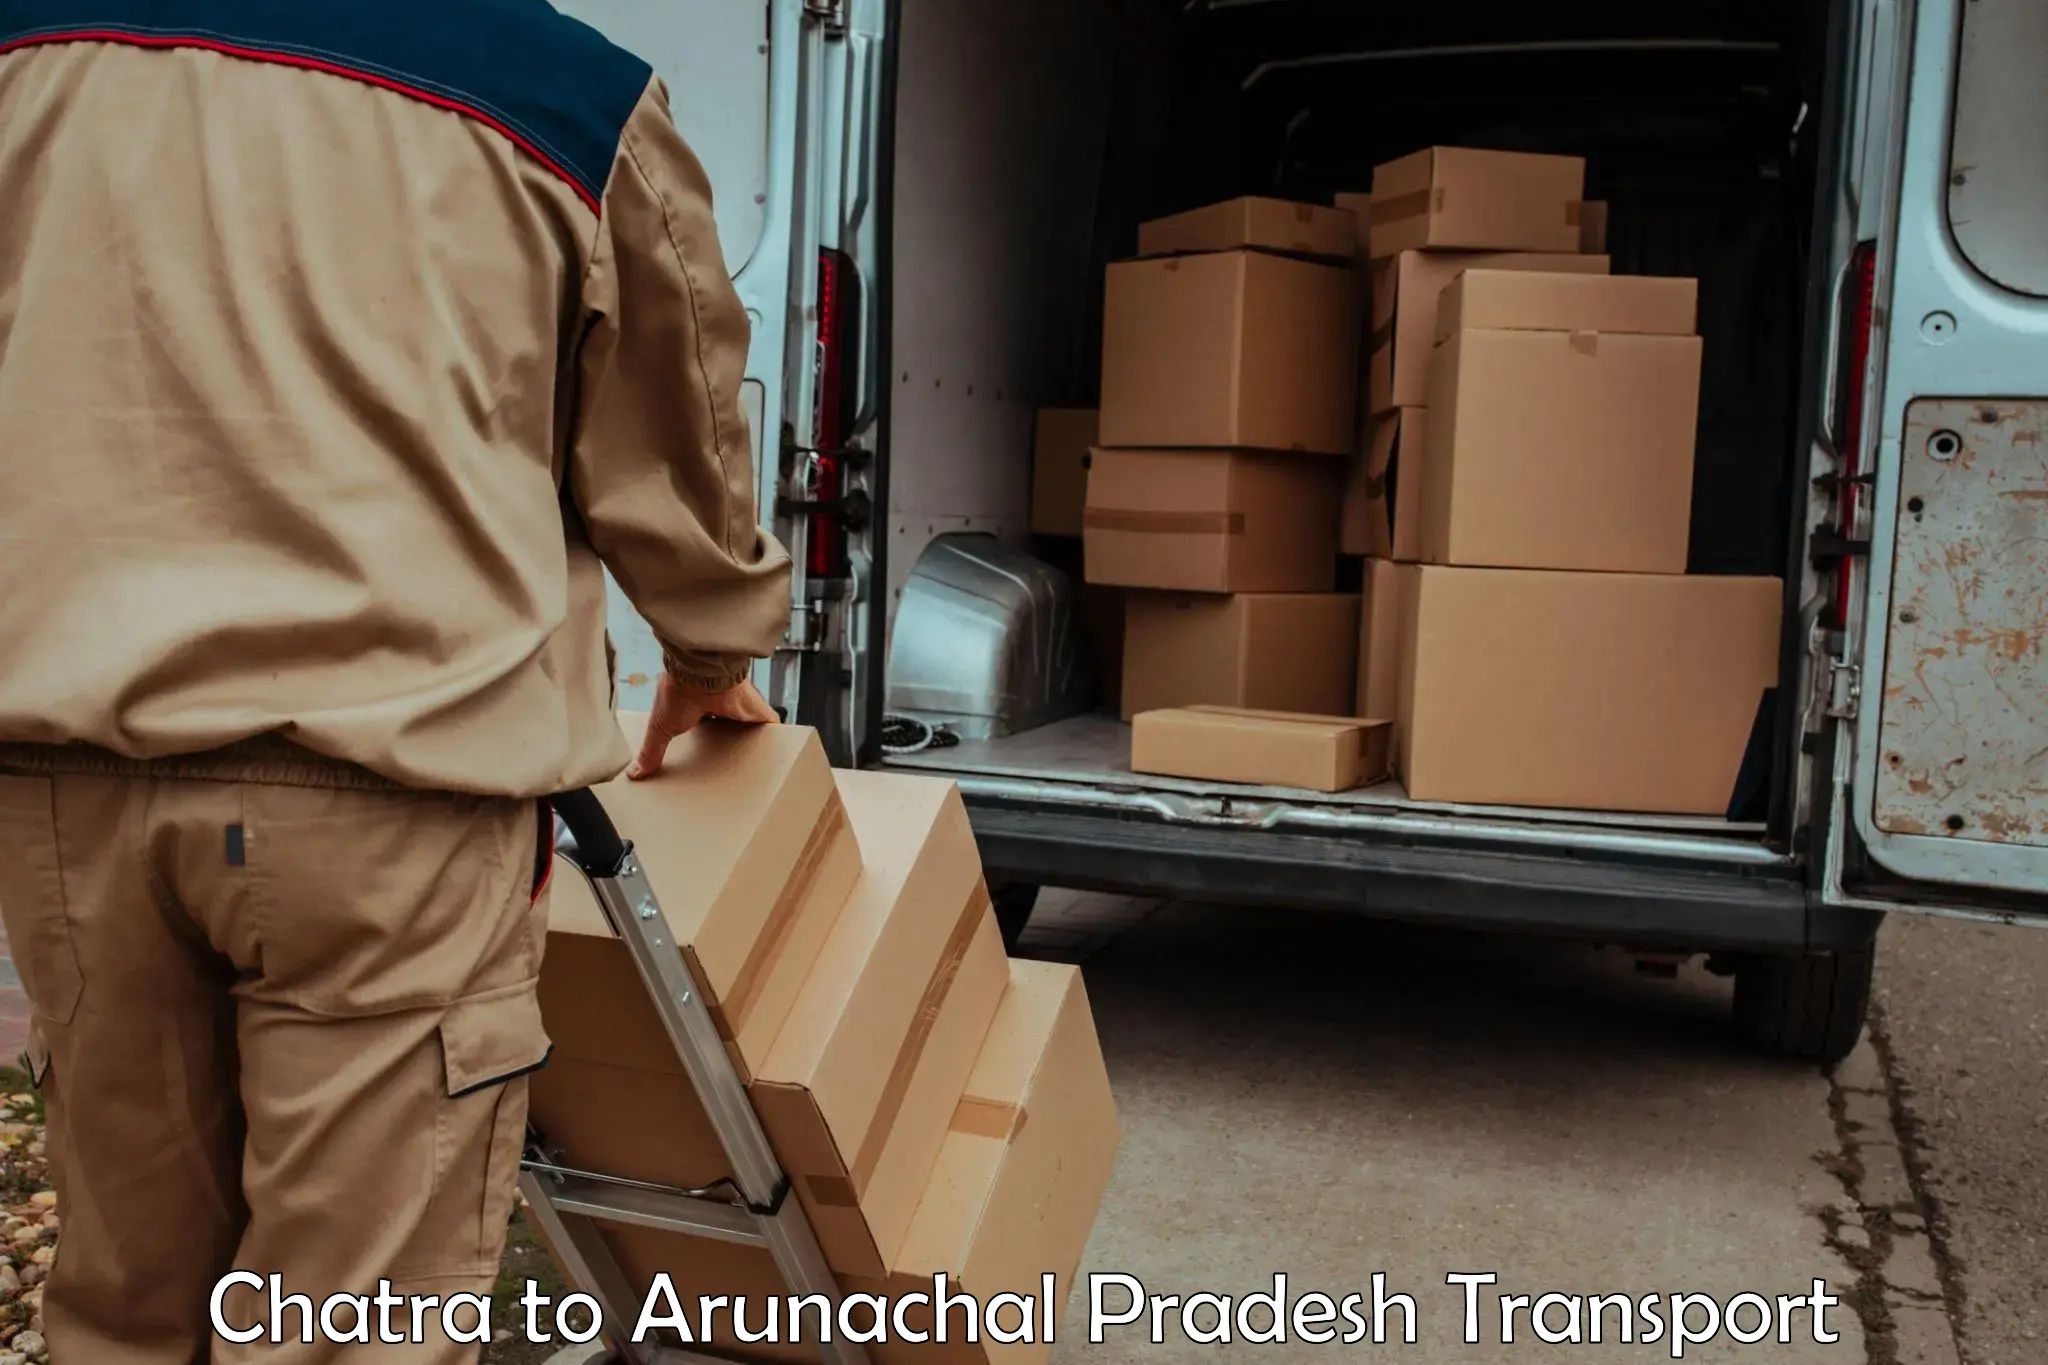 Truck transport companies in India in Chatra to Dirang